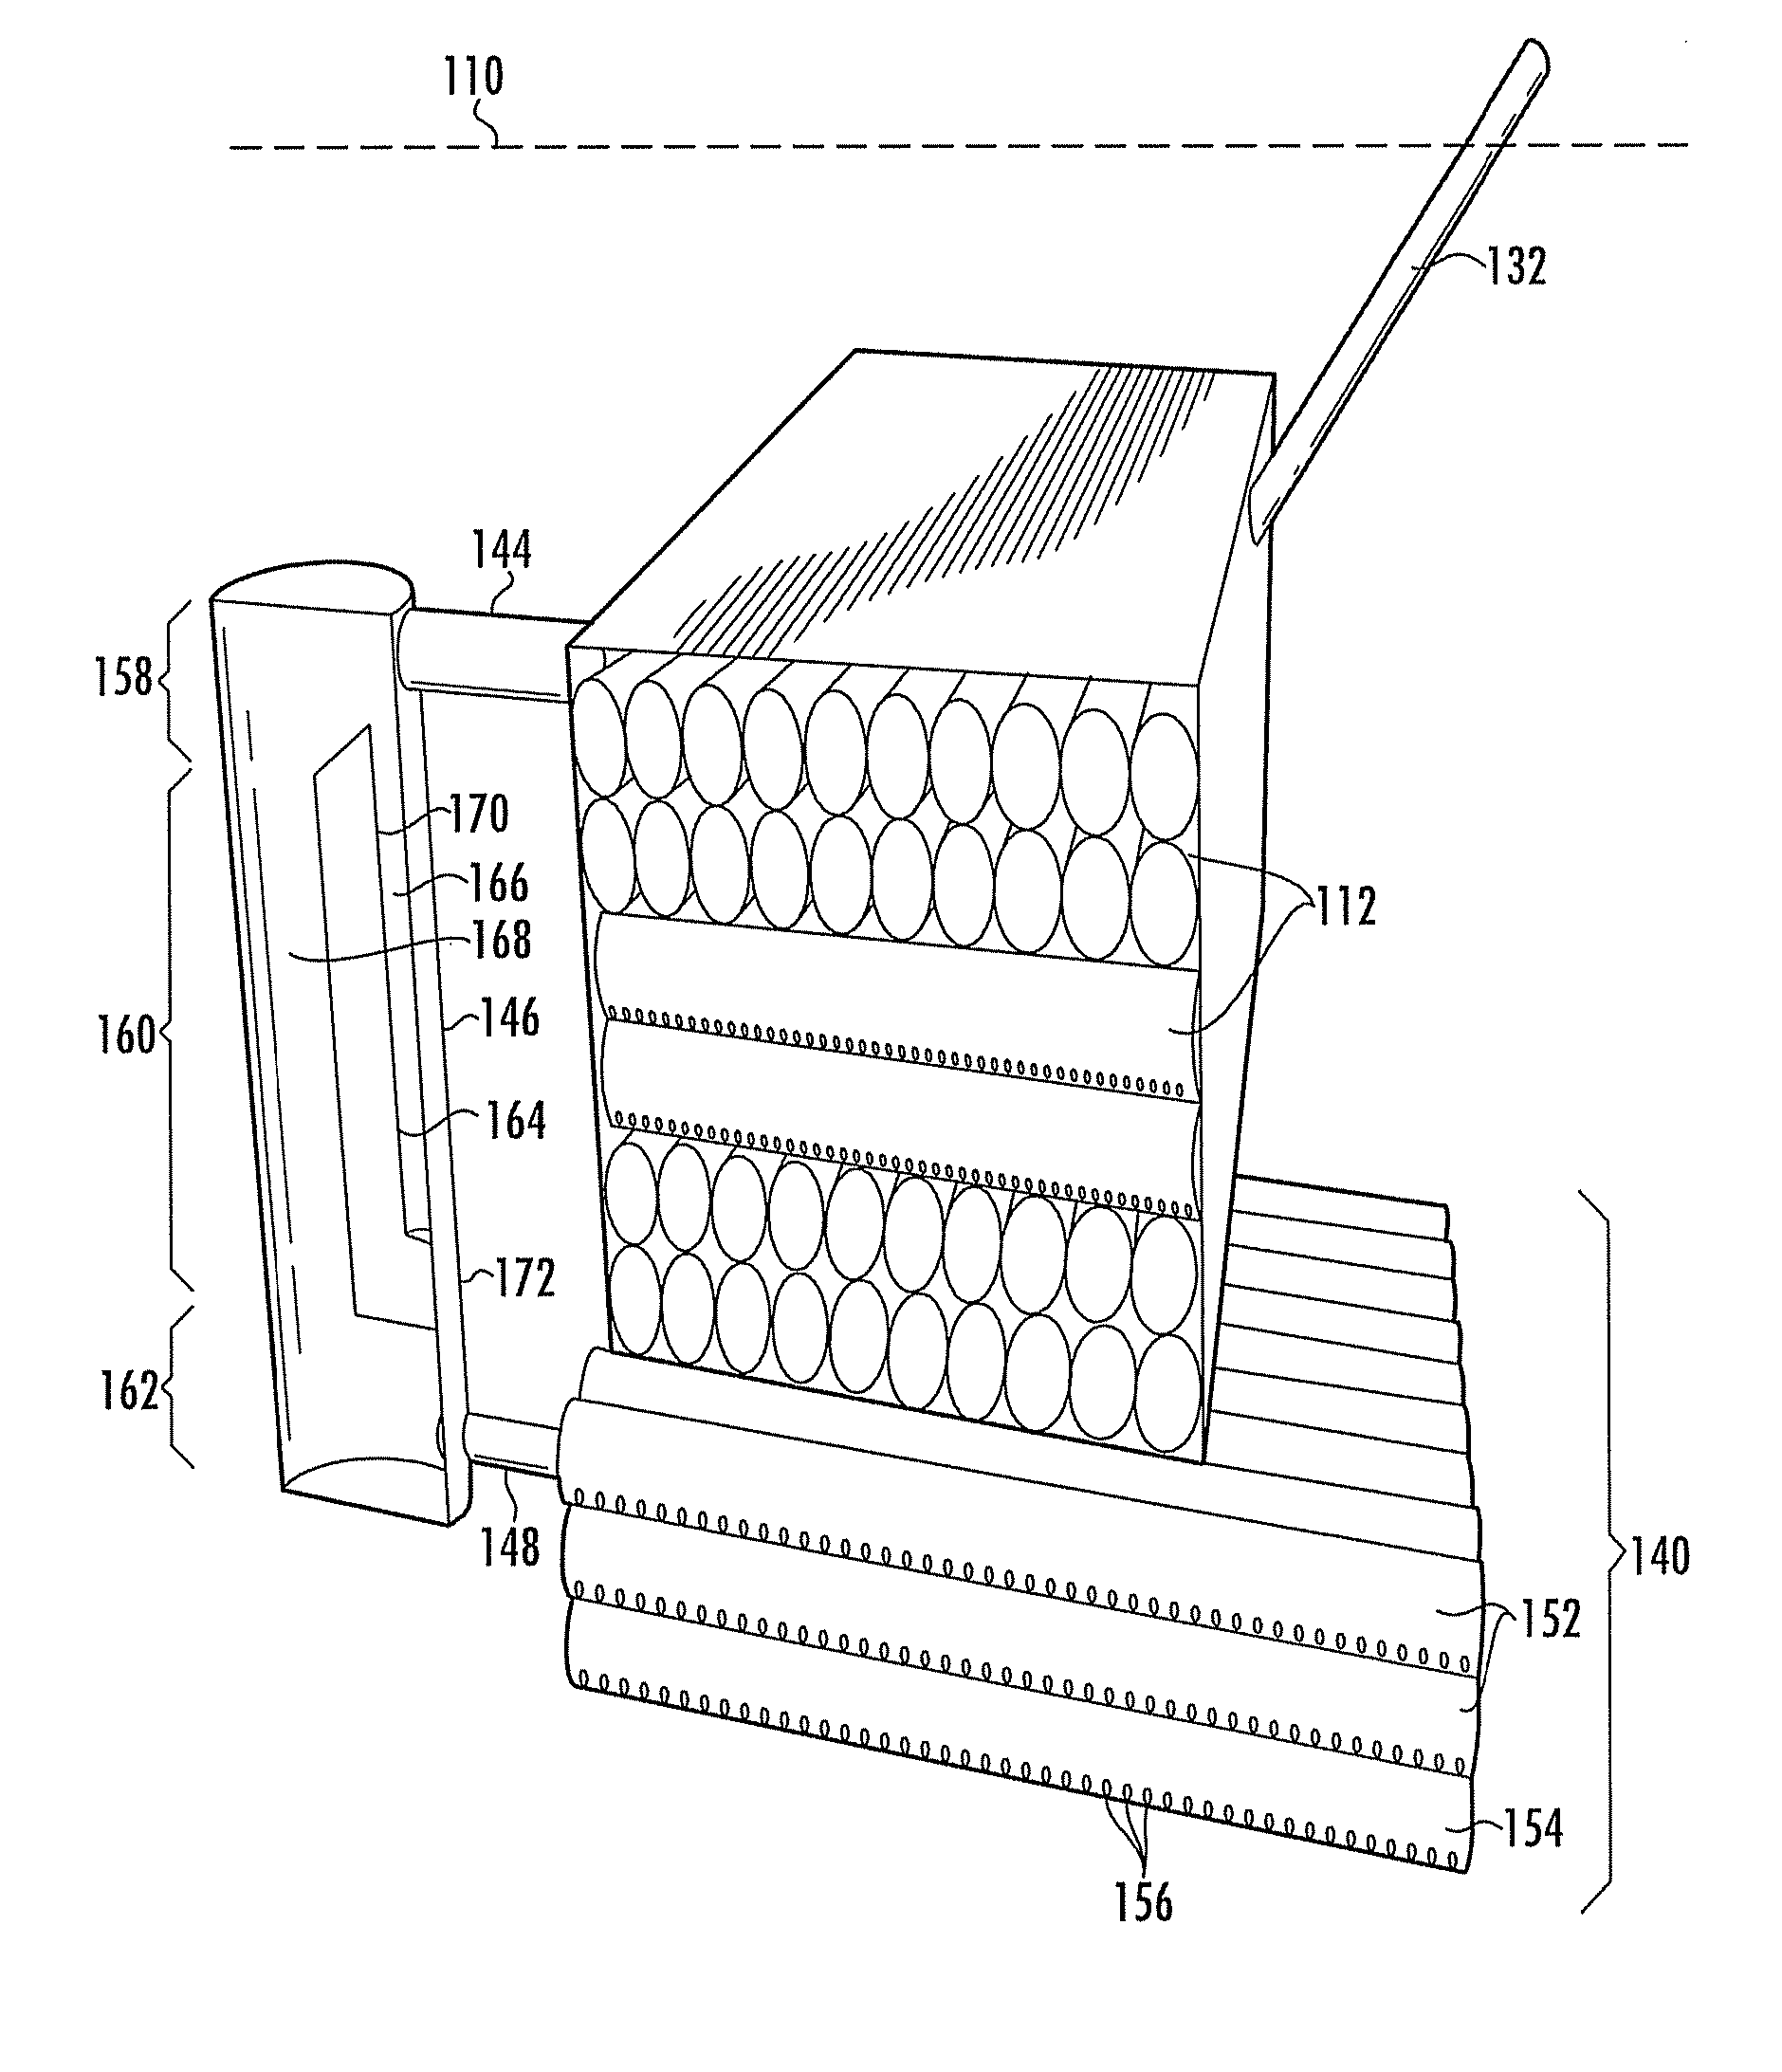 Underground water retention system and associated methods